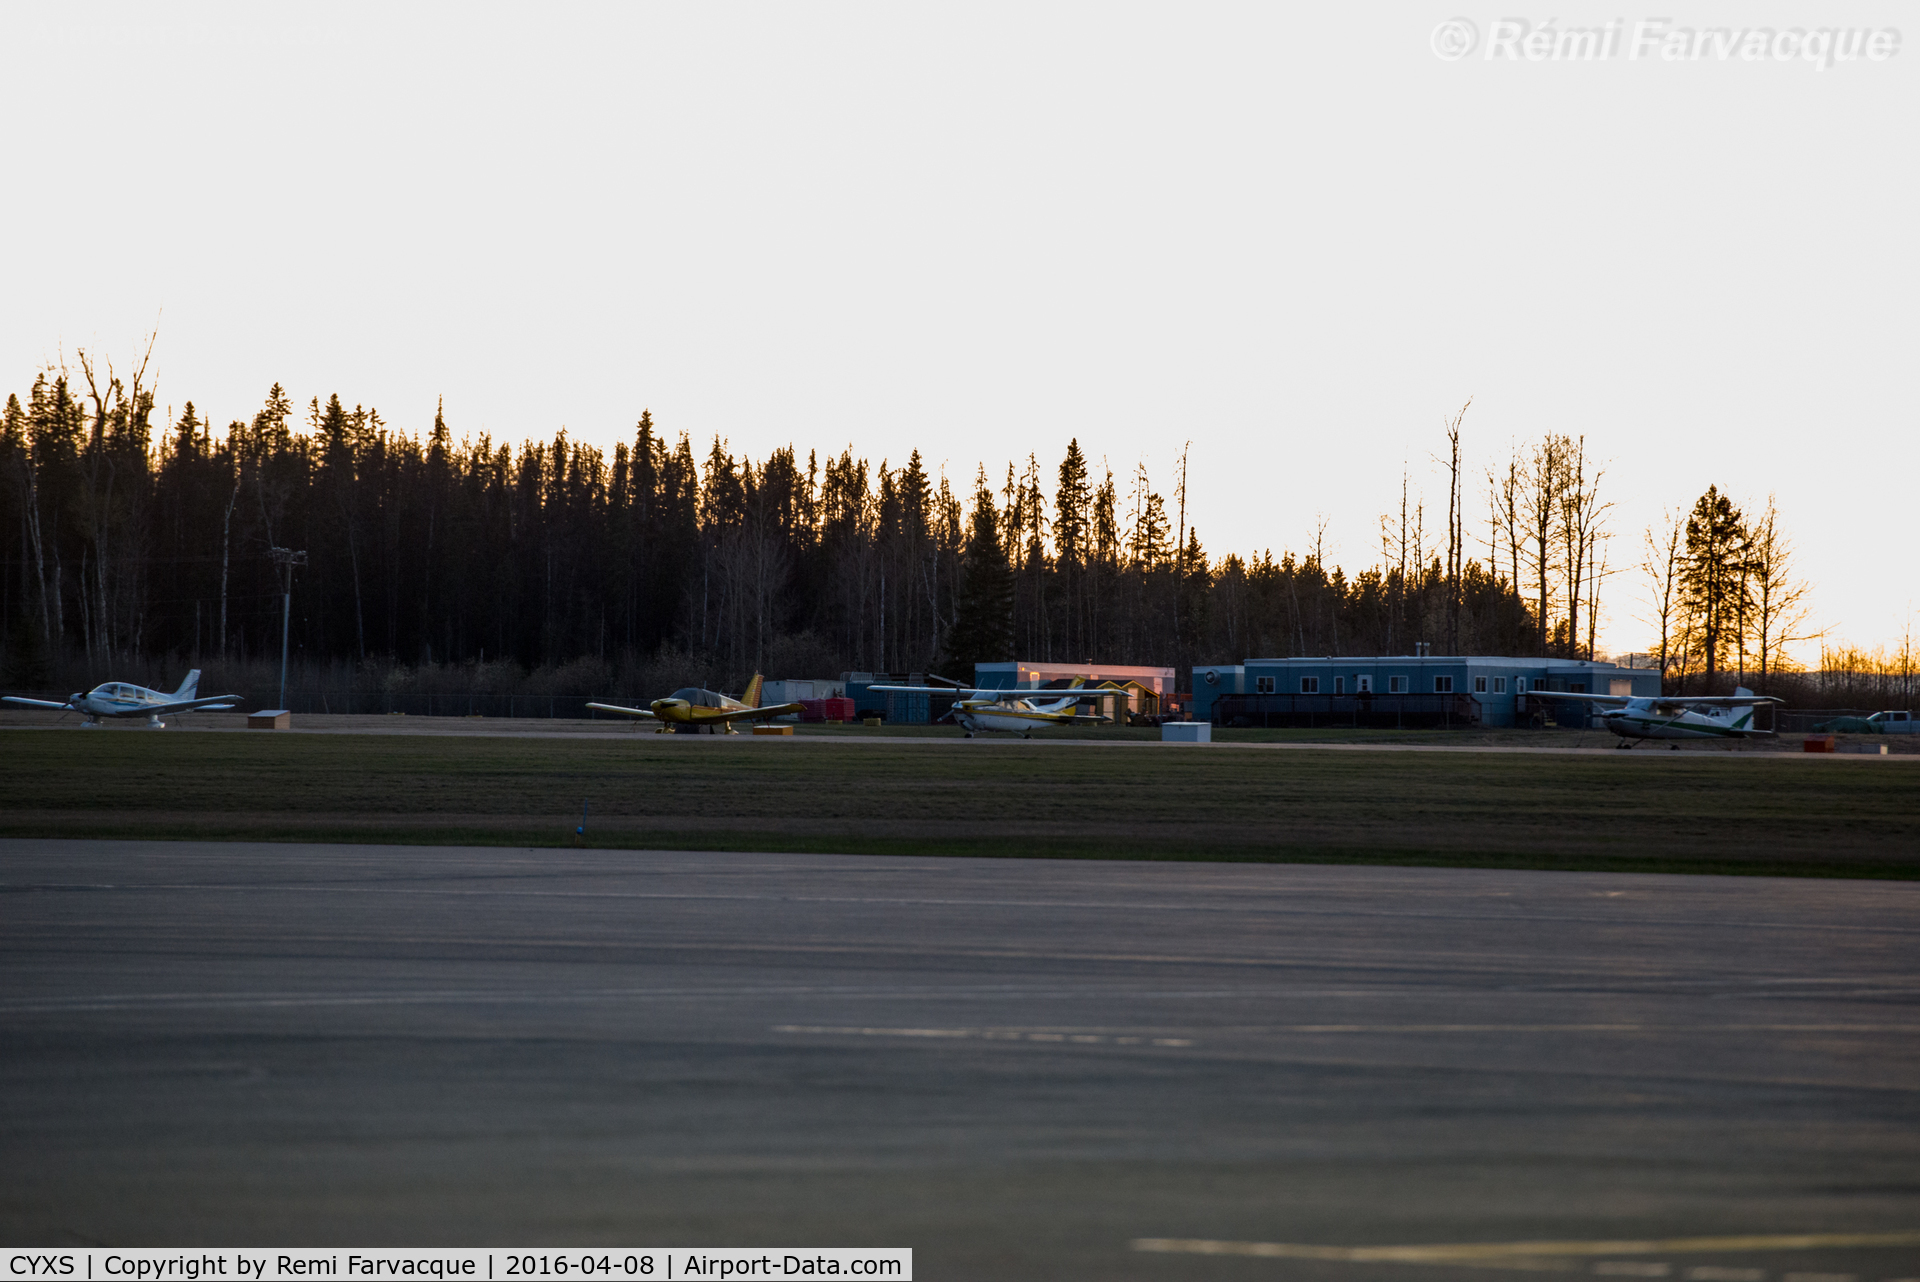 Prince George Airport, Prince George, British Columbia Canada (CYXS) - View of private aeroplanes parked in front of flying club offices.